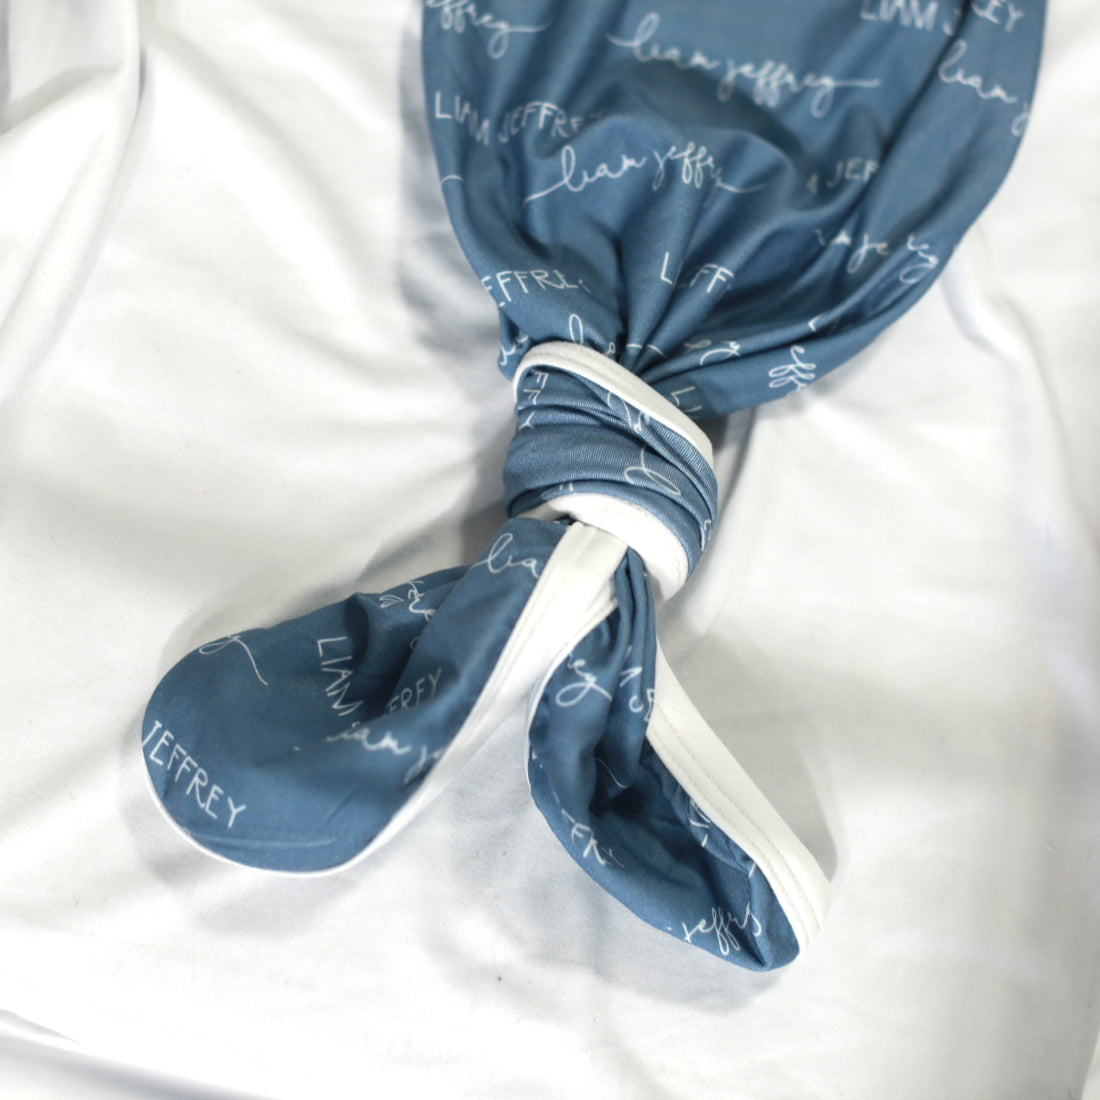 Camden Smokey Blue Knotted Baby Gown